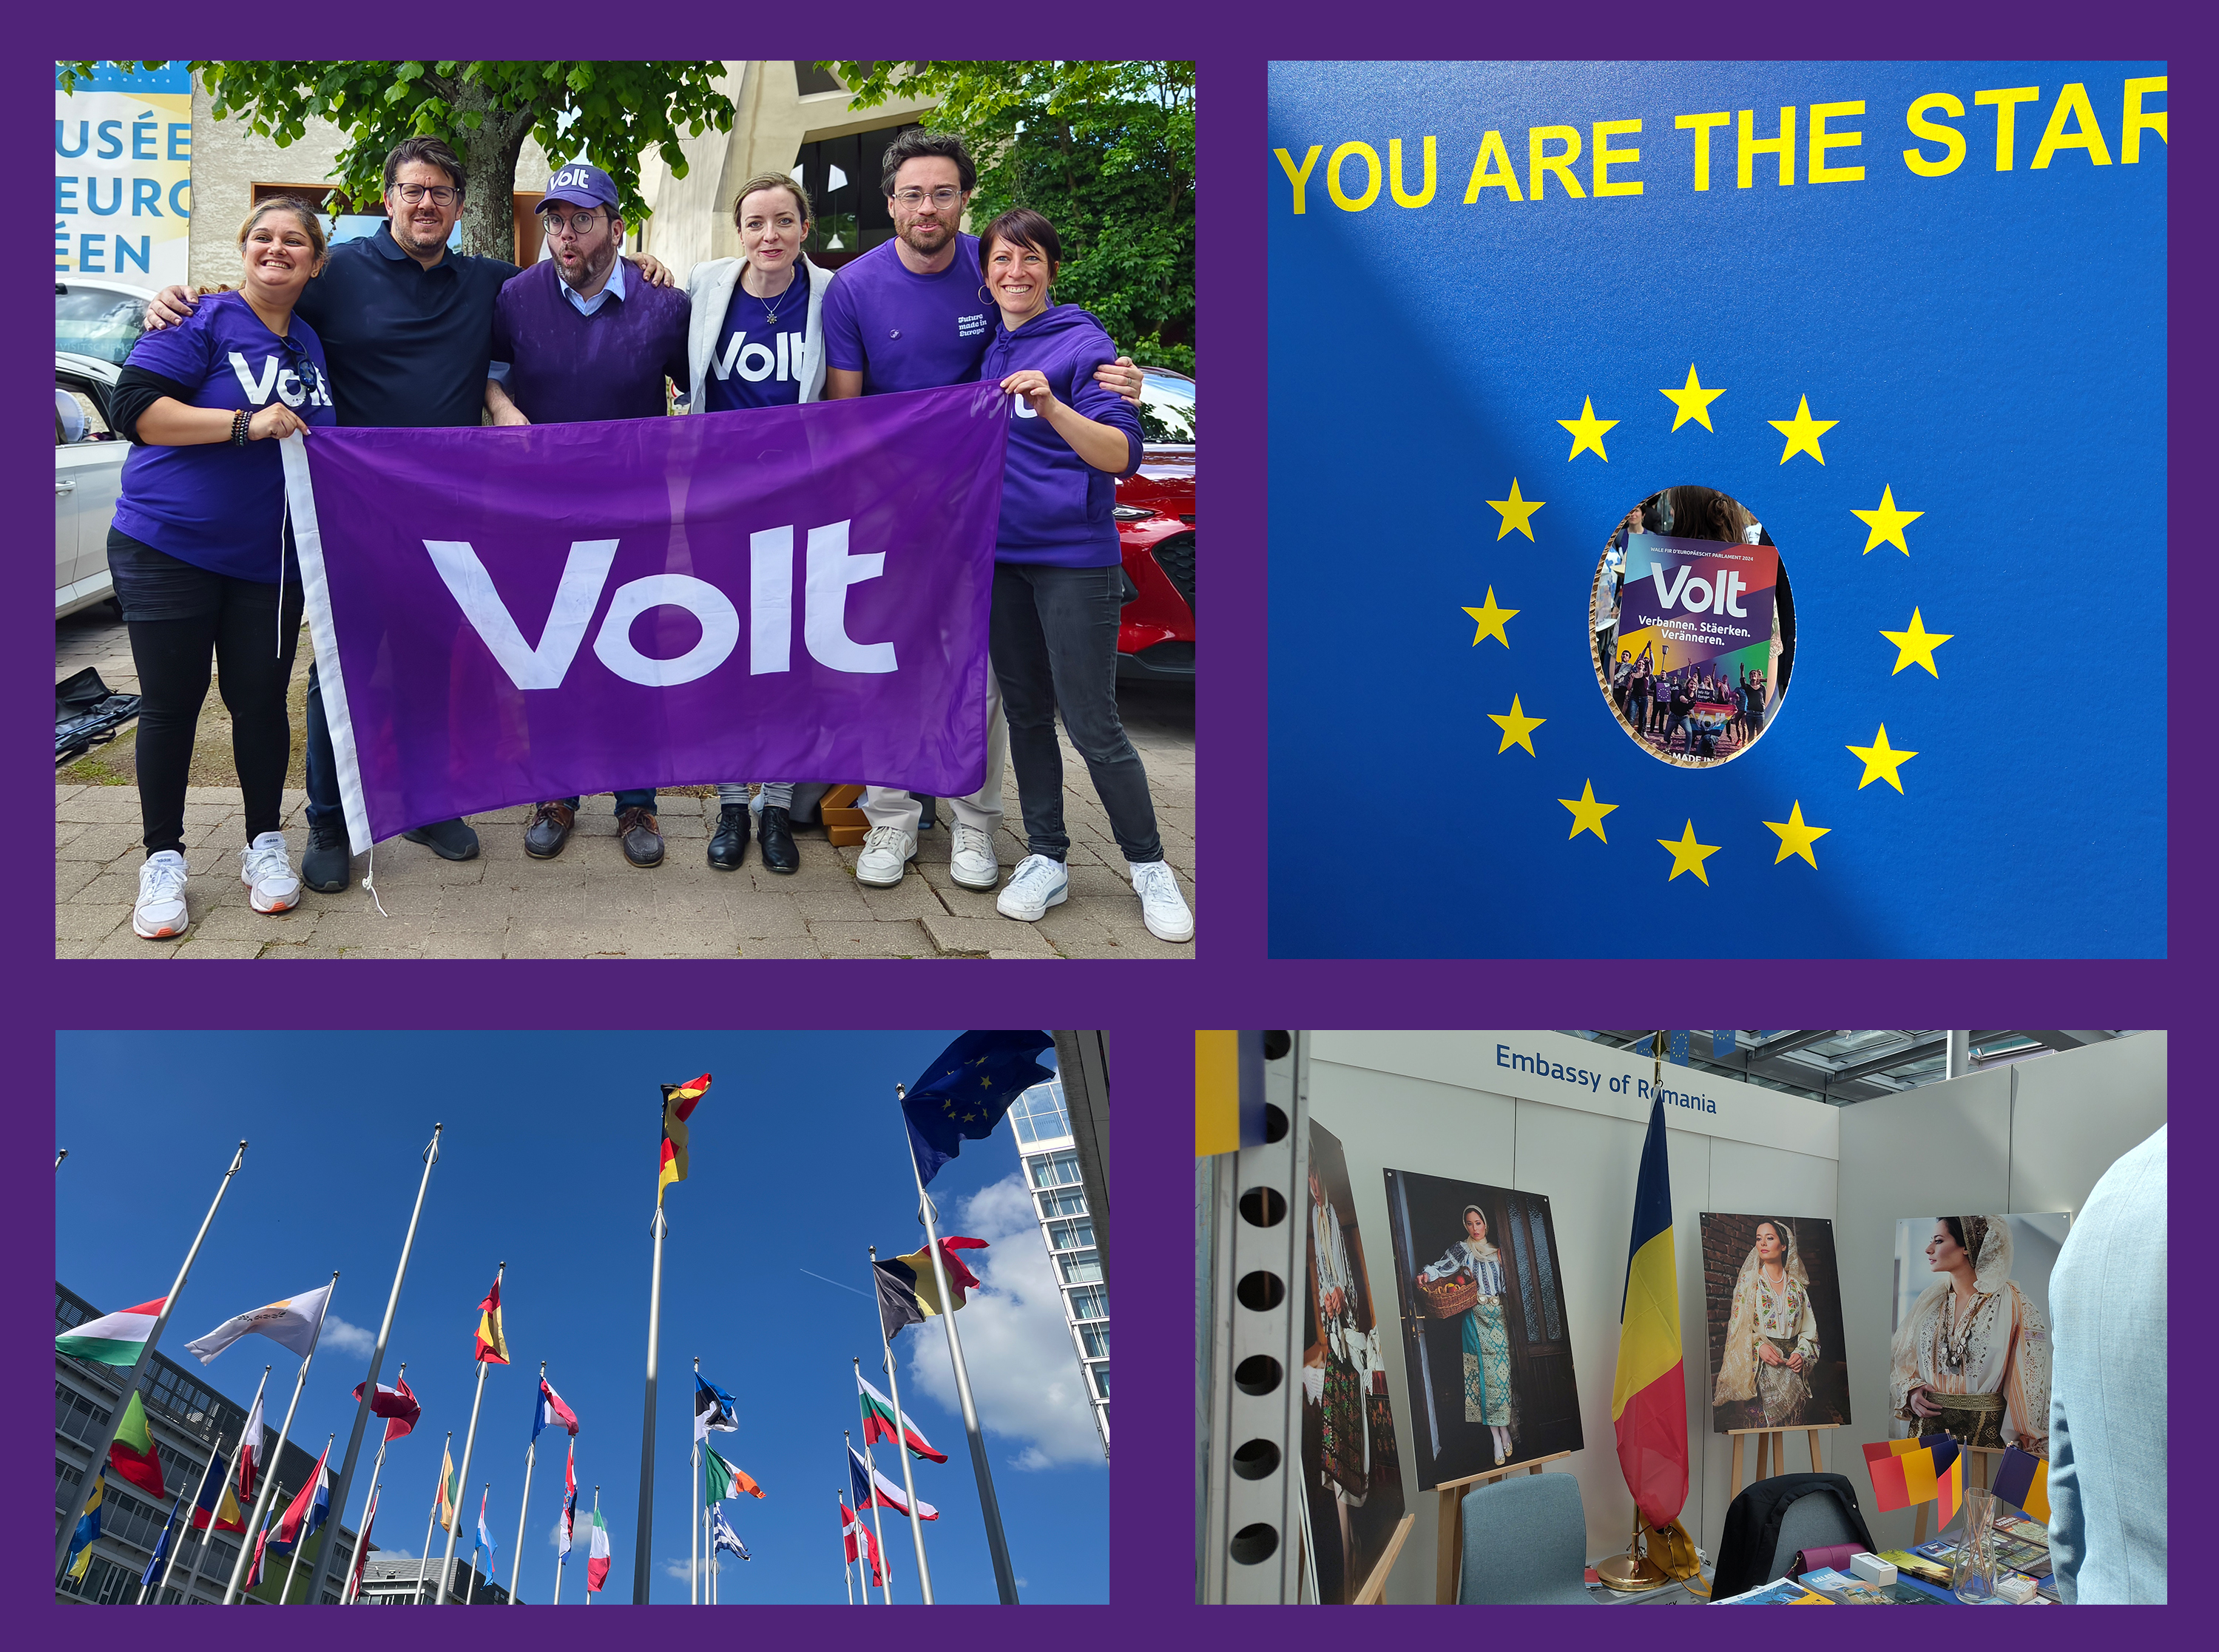 A collage of pictures. Top left: Volt candidates holding the Volt flag. Top right: Volt magazine inside of European stars. Bottom left: European flags infront of the European parliament. Bottom right: Stand of the Embassy of Romania.